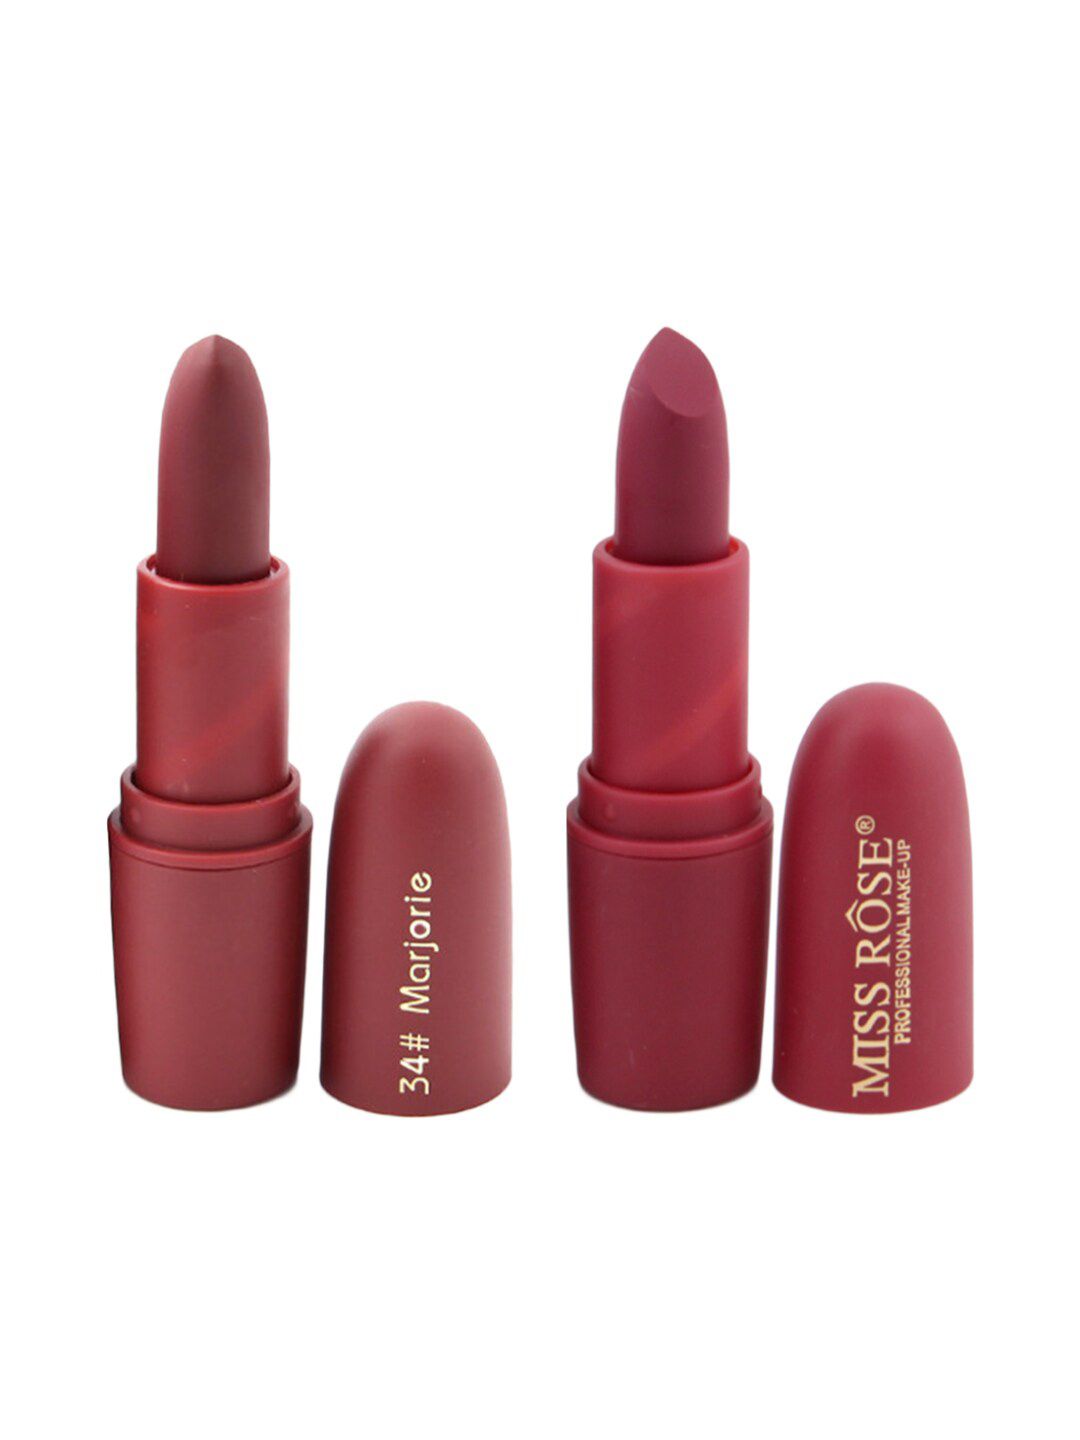 MISS ROSE Professional Make-Up Set of 2 Matte Creamy Lipsticks - Marjorie 34 & Chii 49 Price in India